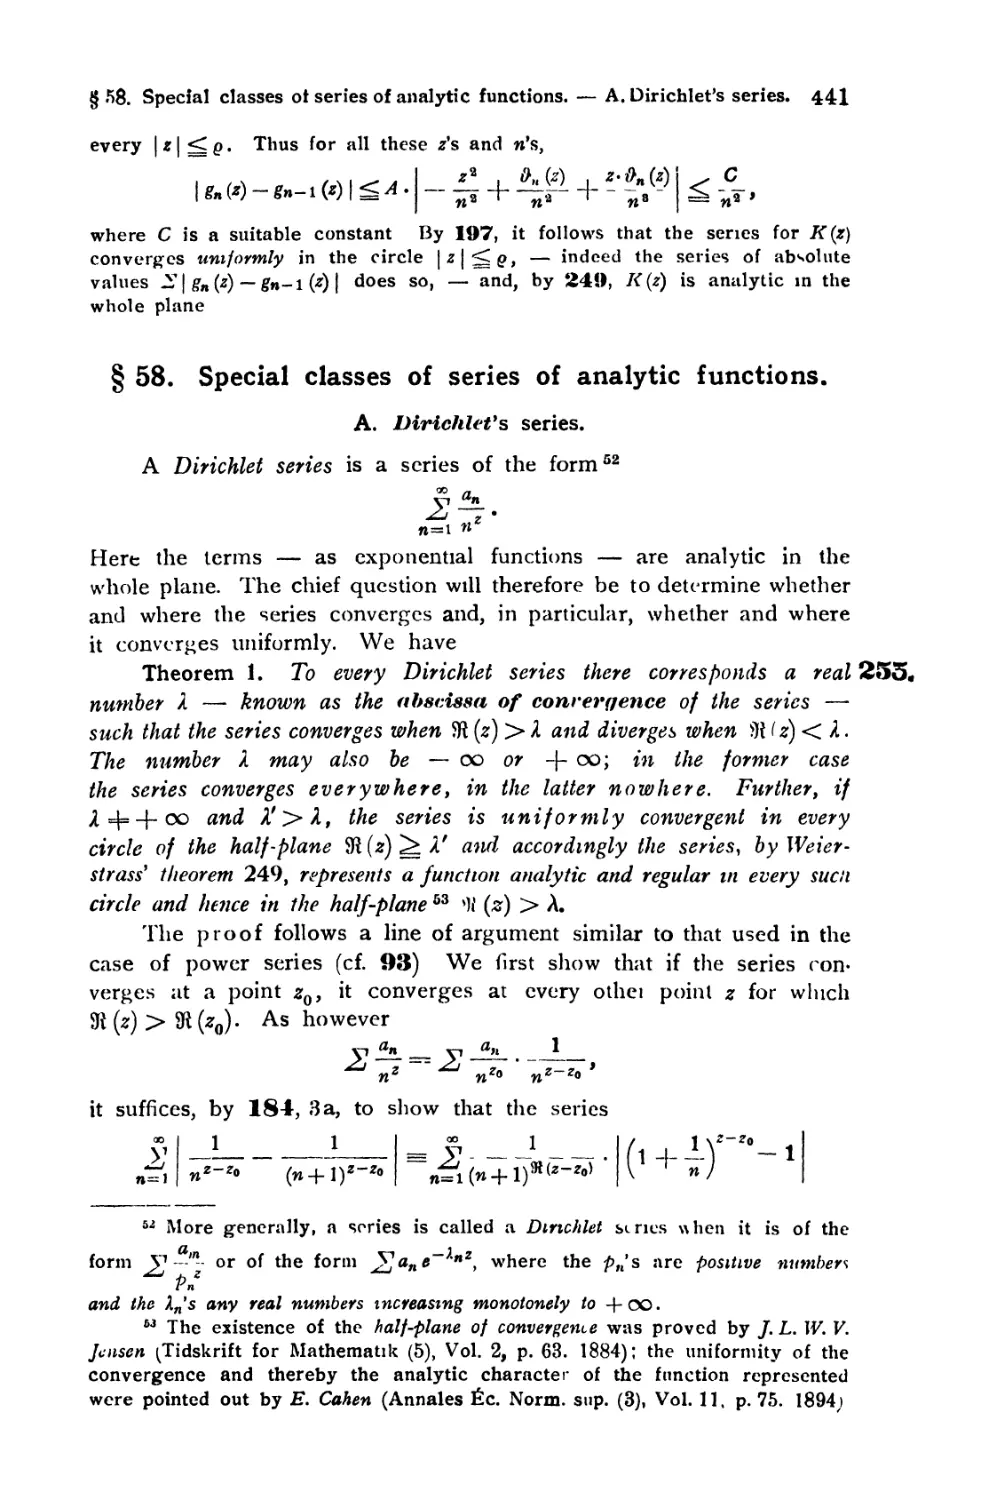 § 58. Special classes of series of analytic functions